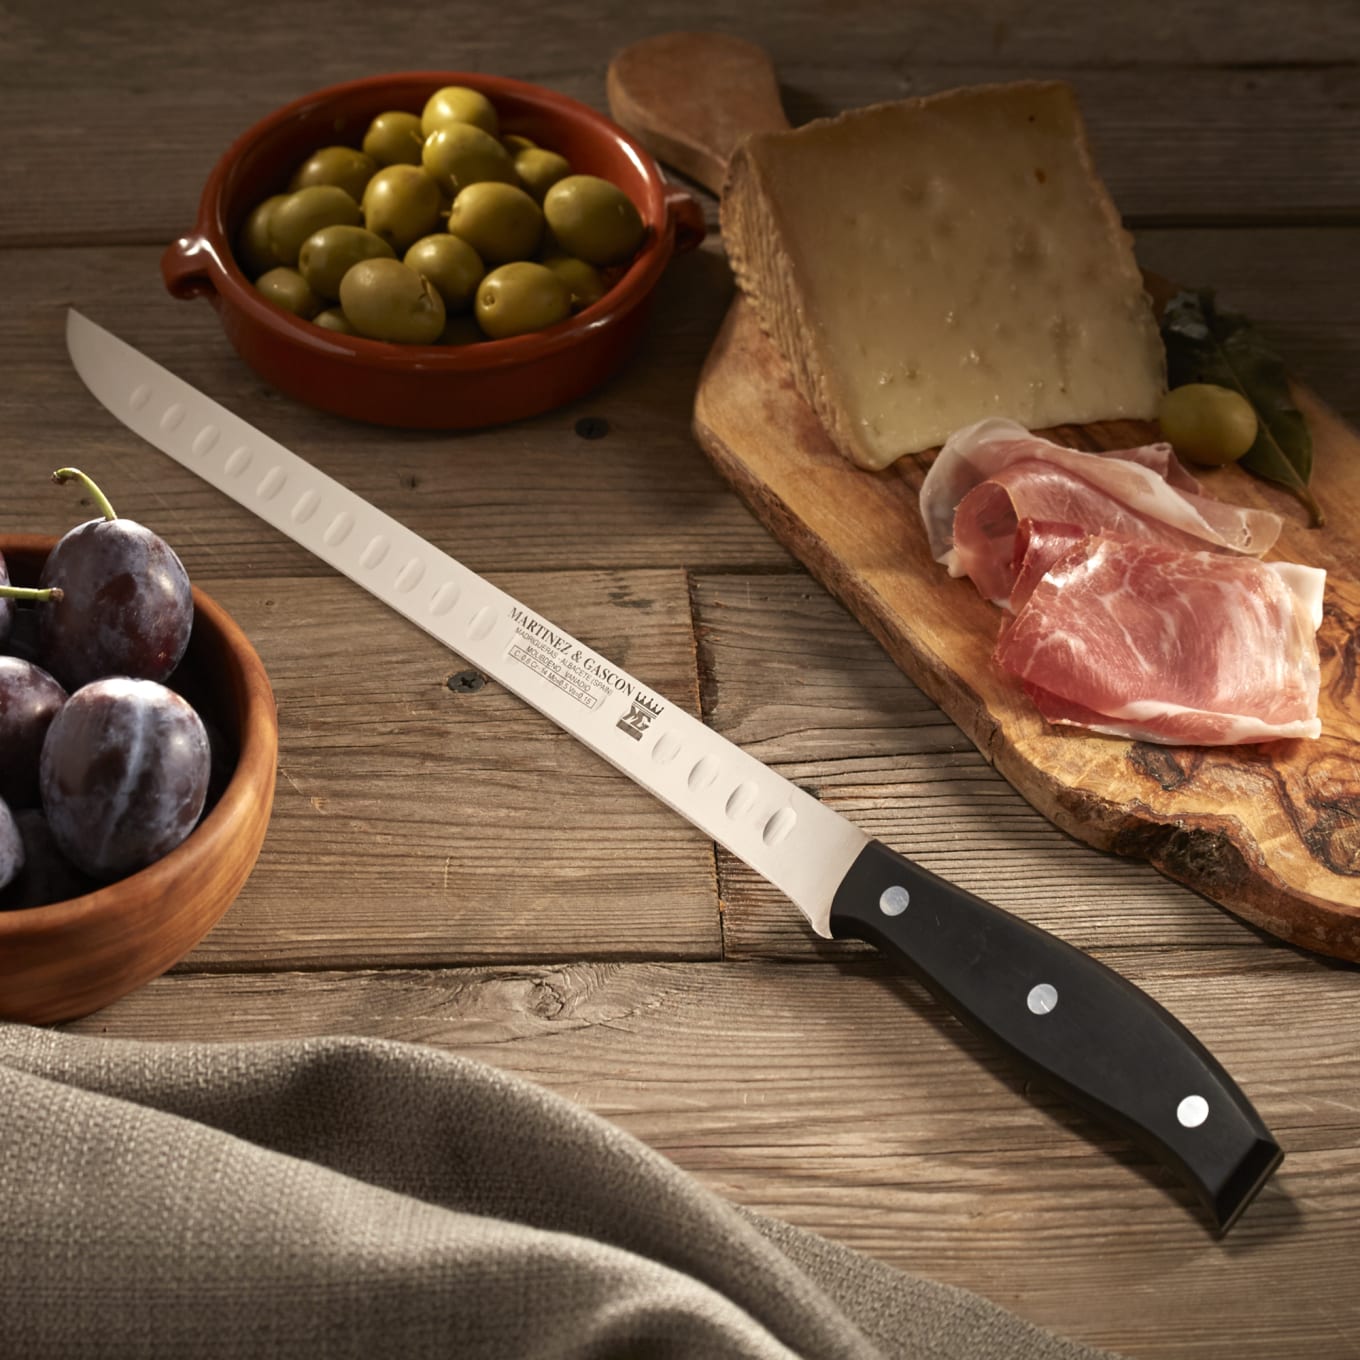 Jamón Cutting Knife - 11 Inches